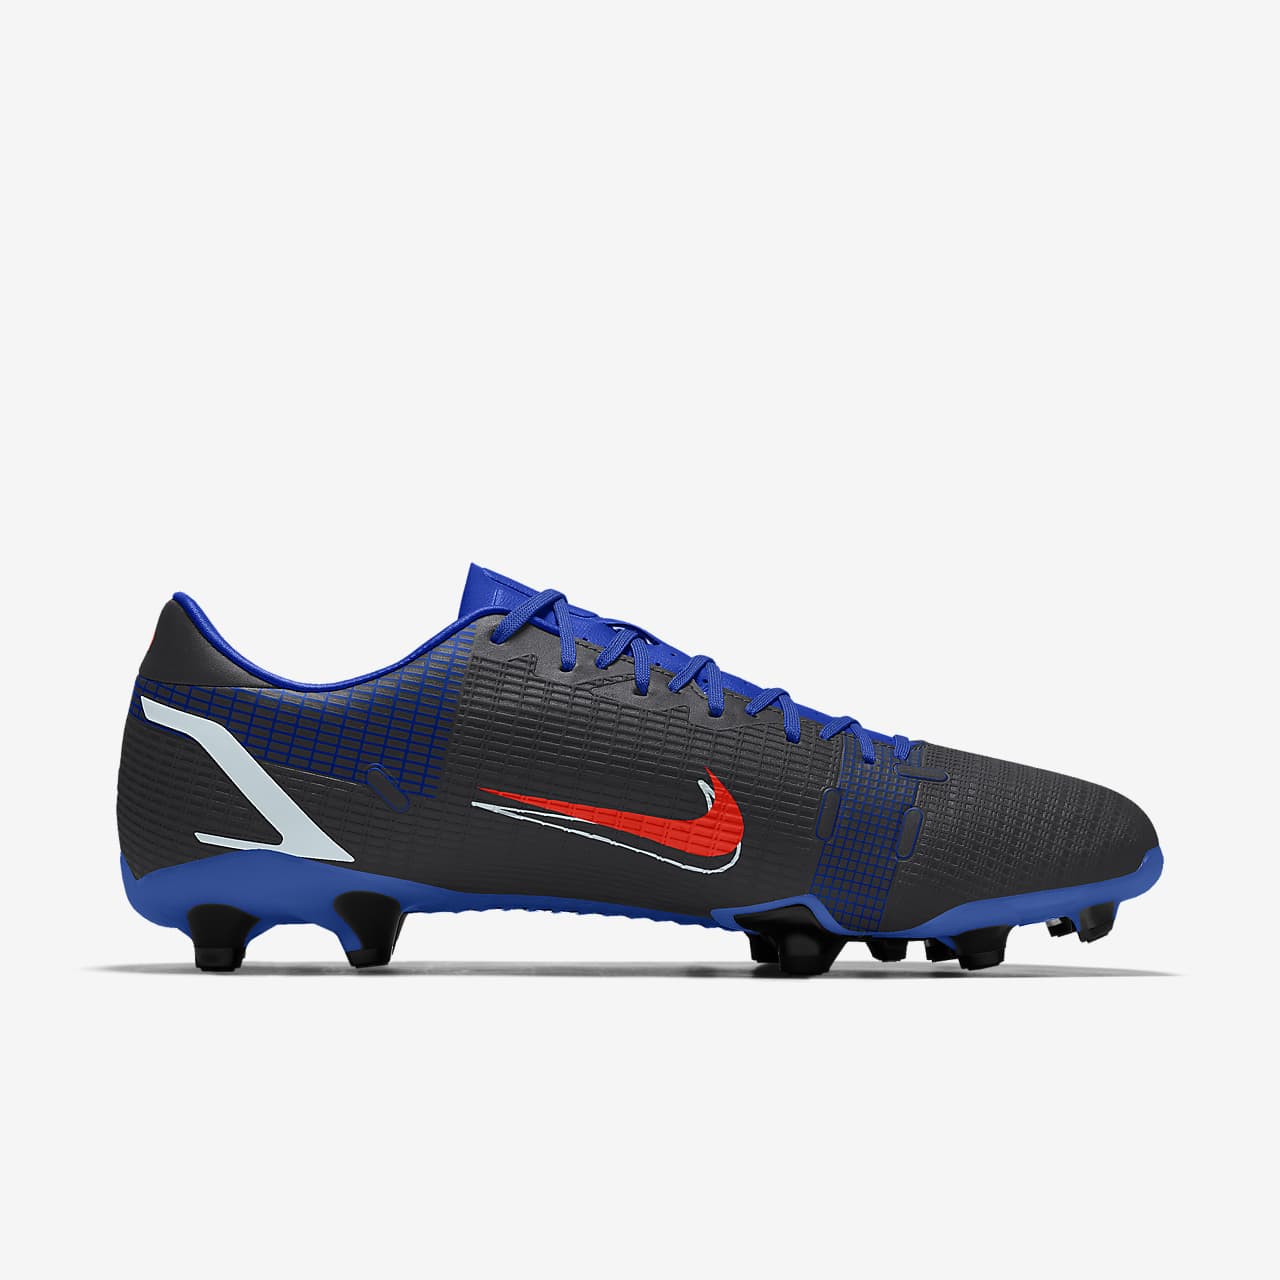 save Nonsense Engaged Nike Mercurial Vapor 14 Academy By You Custom Football Boots. Nike ID